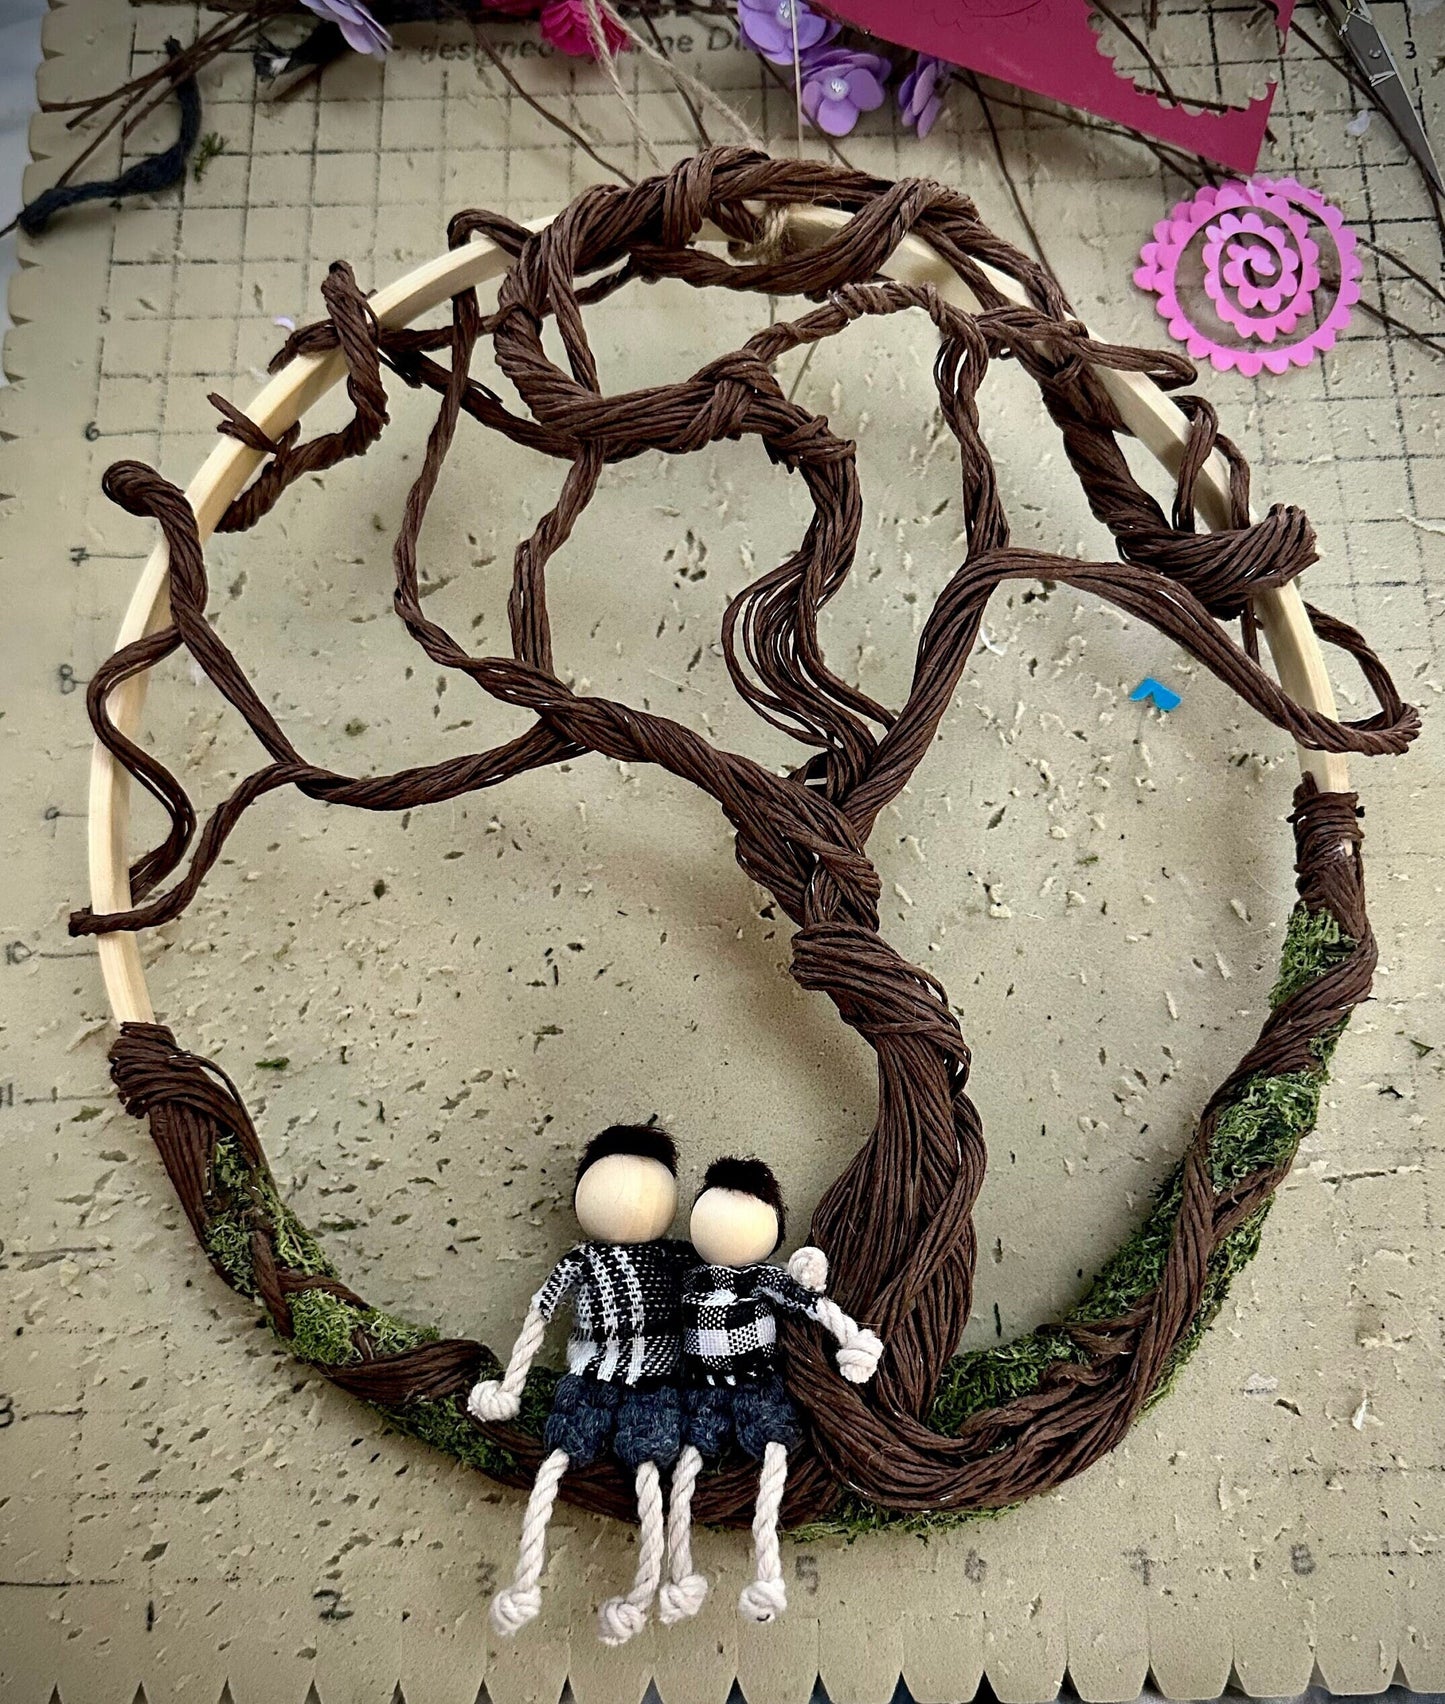 Tree of life family portrait wall hang with customized dolls.